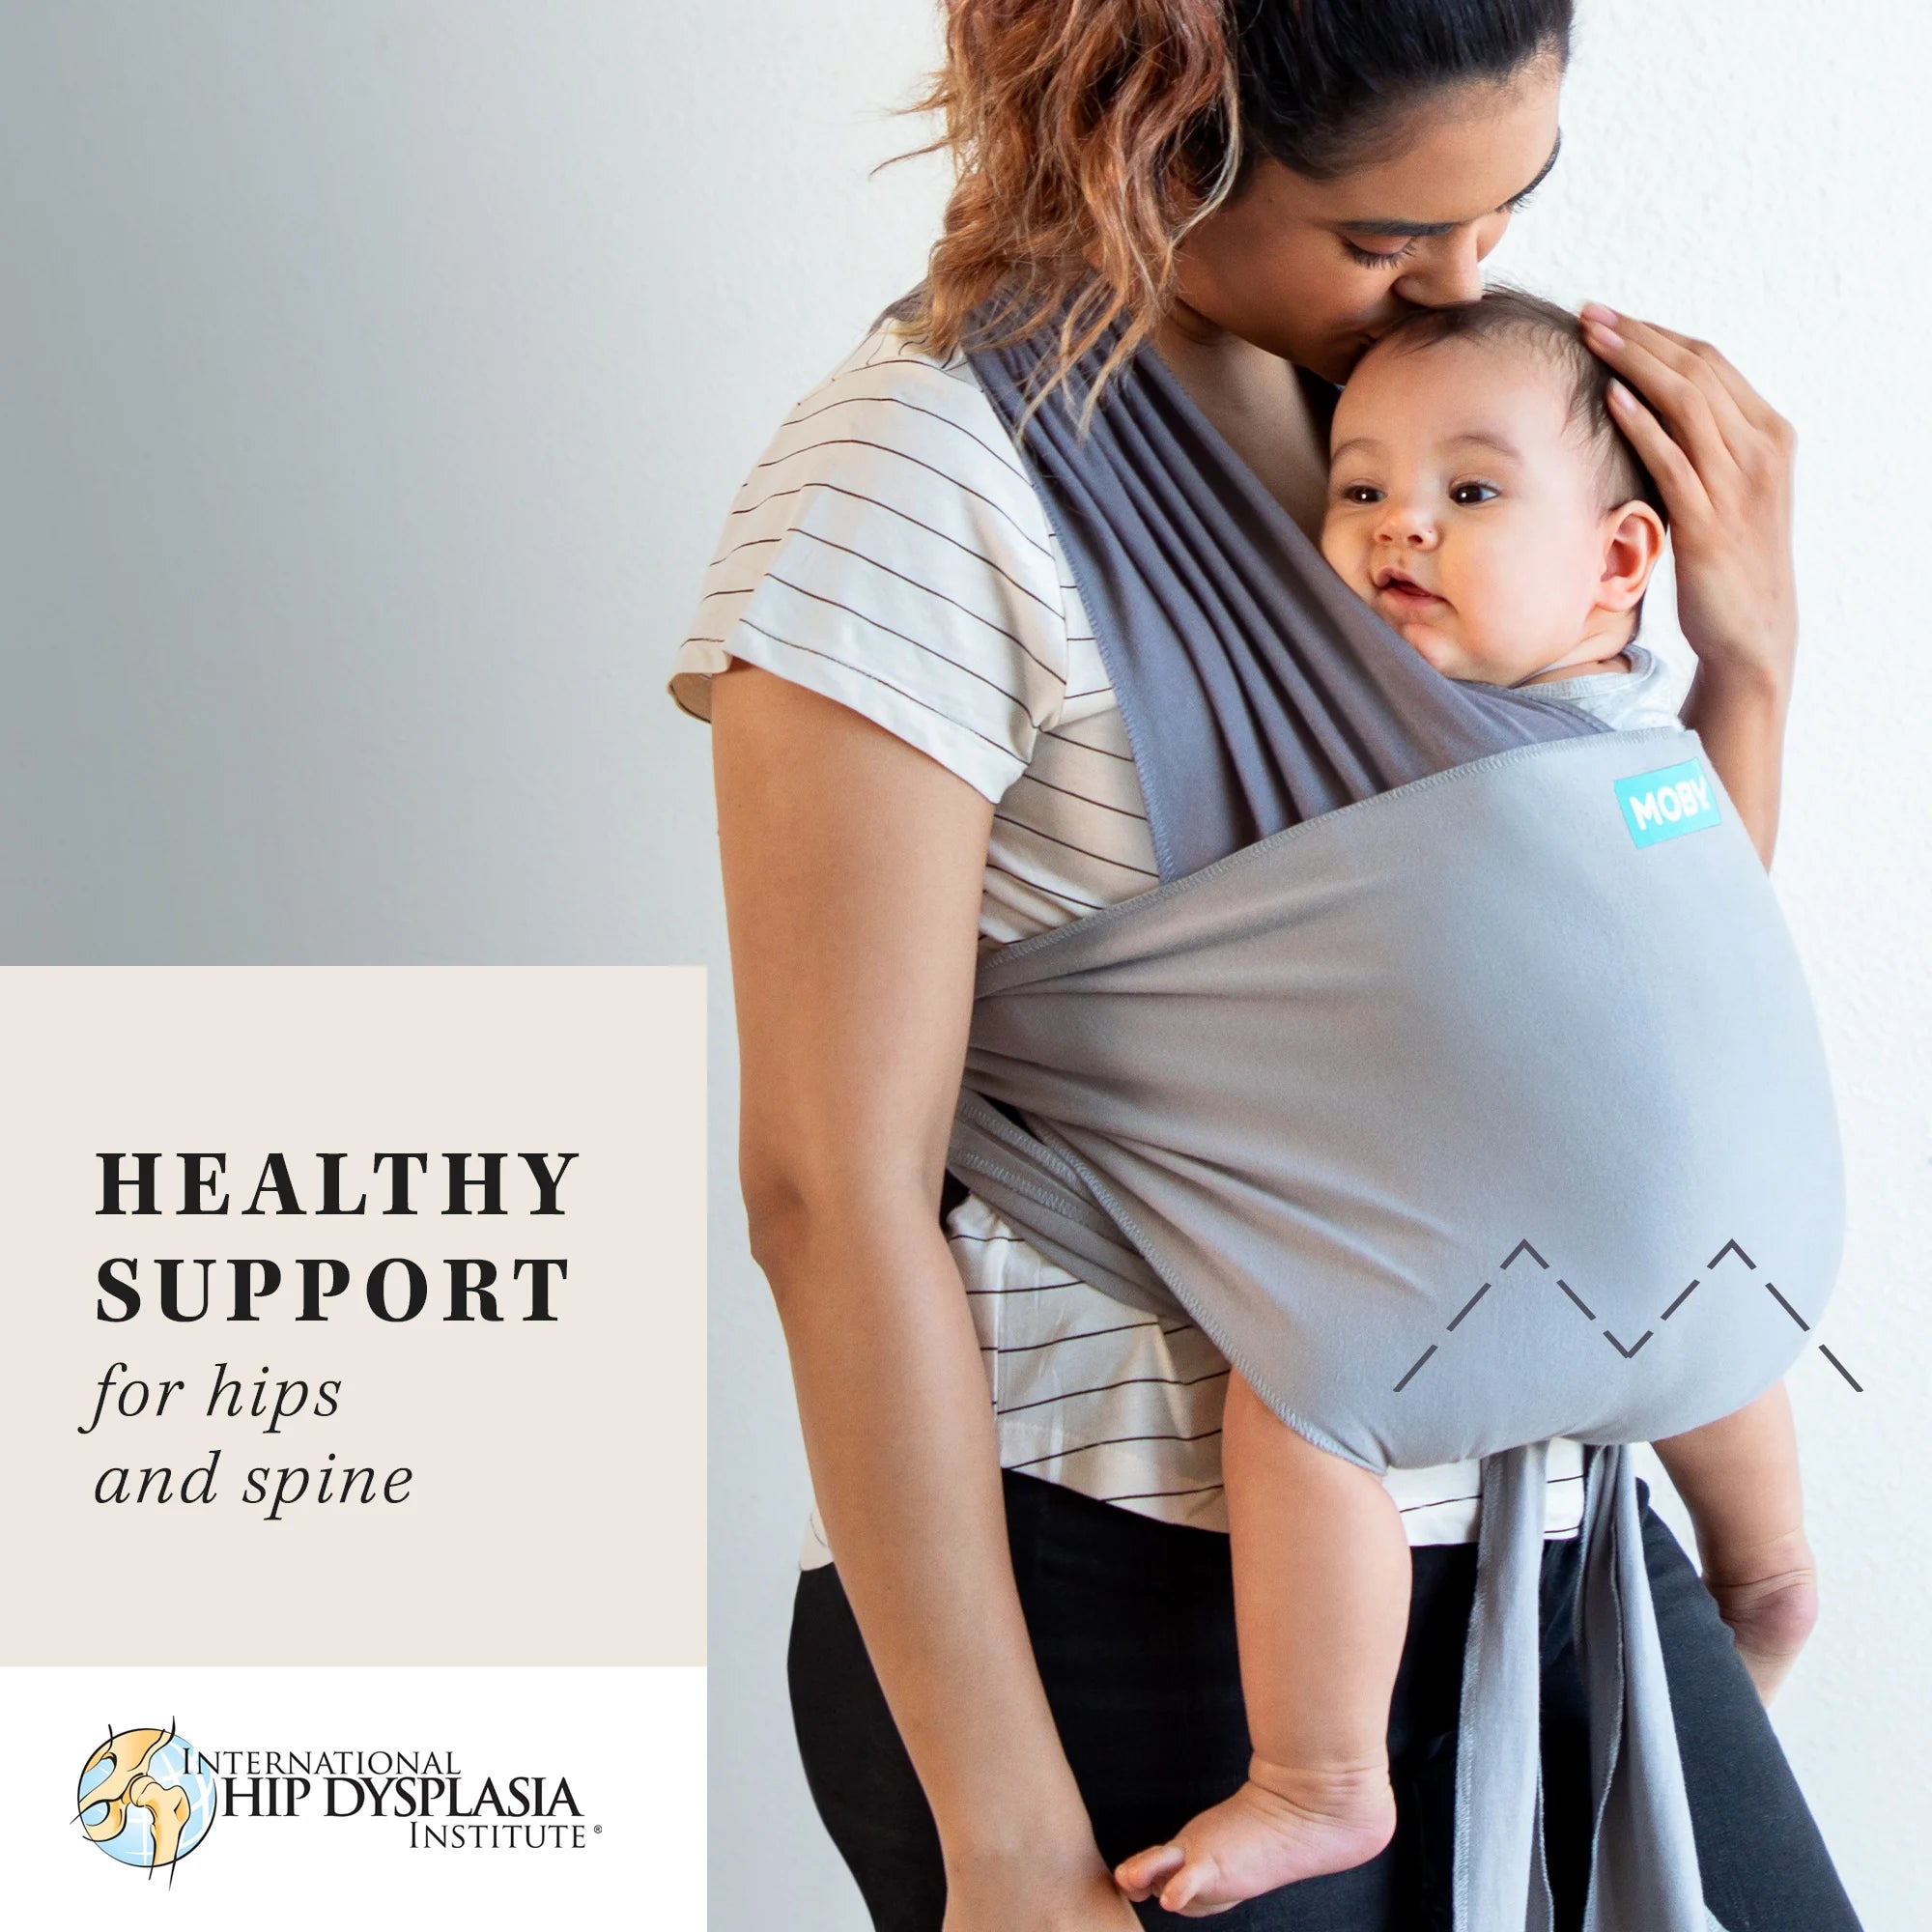 easy-wrap healthy support for hips and spine certified by international hip dysplasia institute